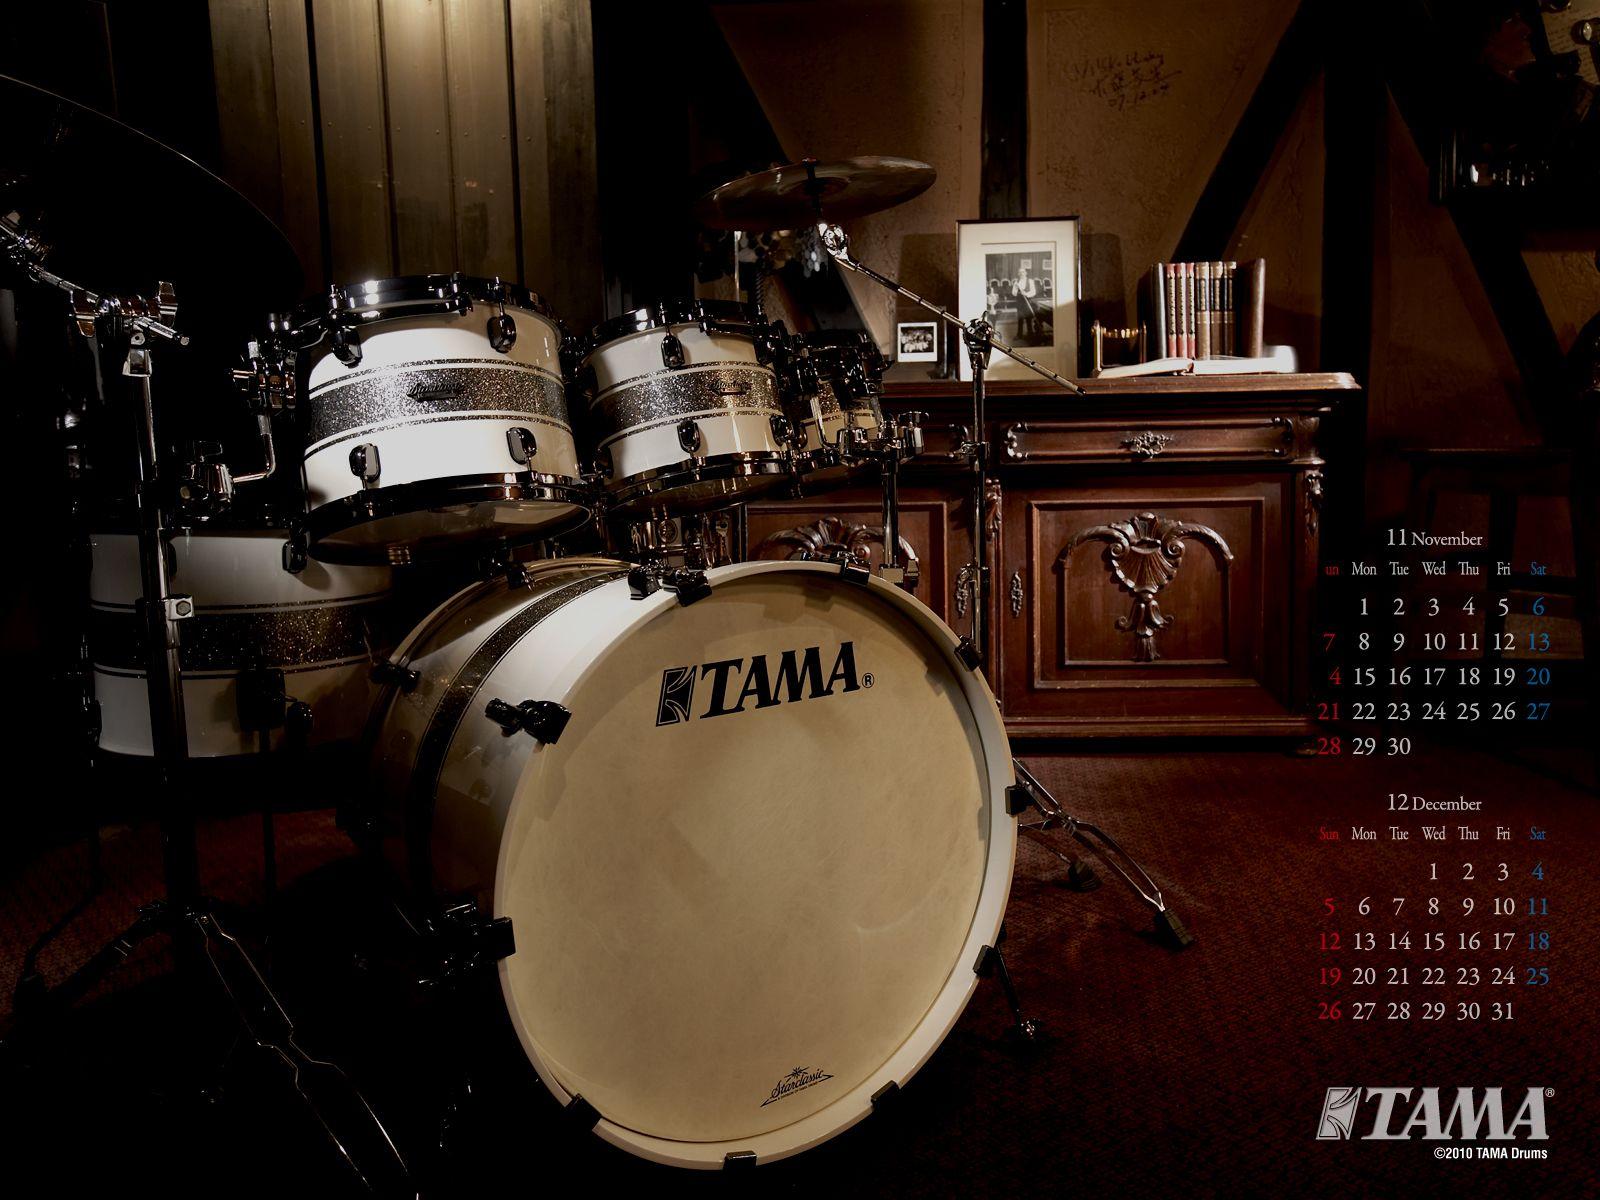 Tama Drums Wallpaper. Android. Drums